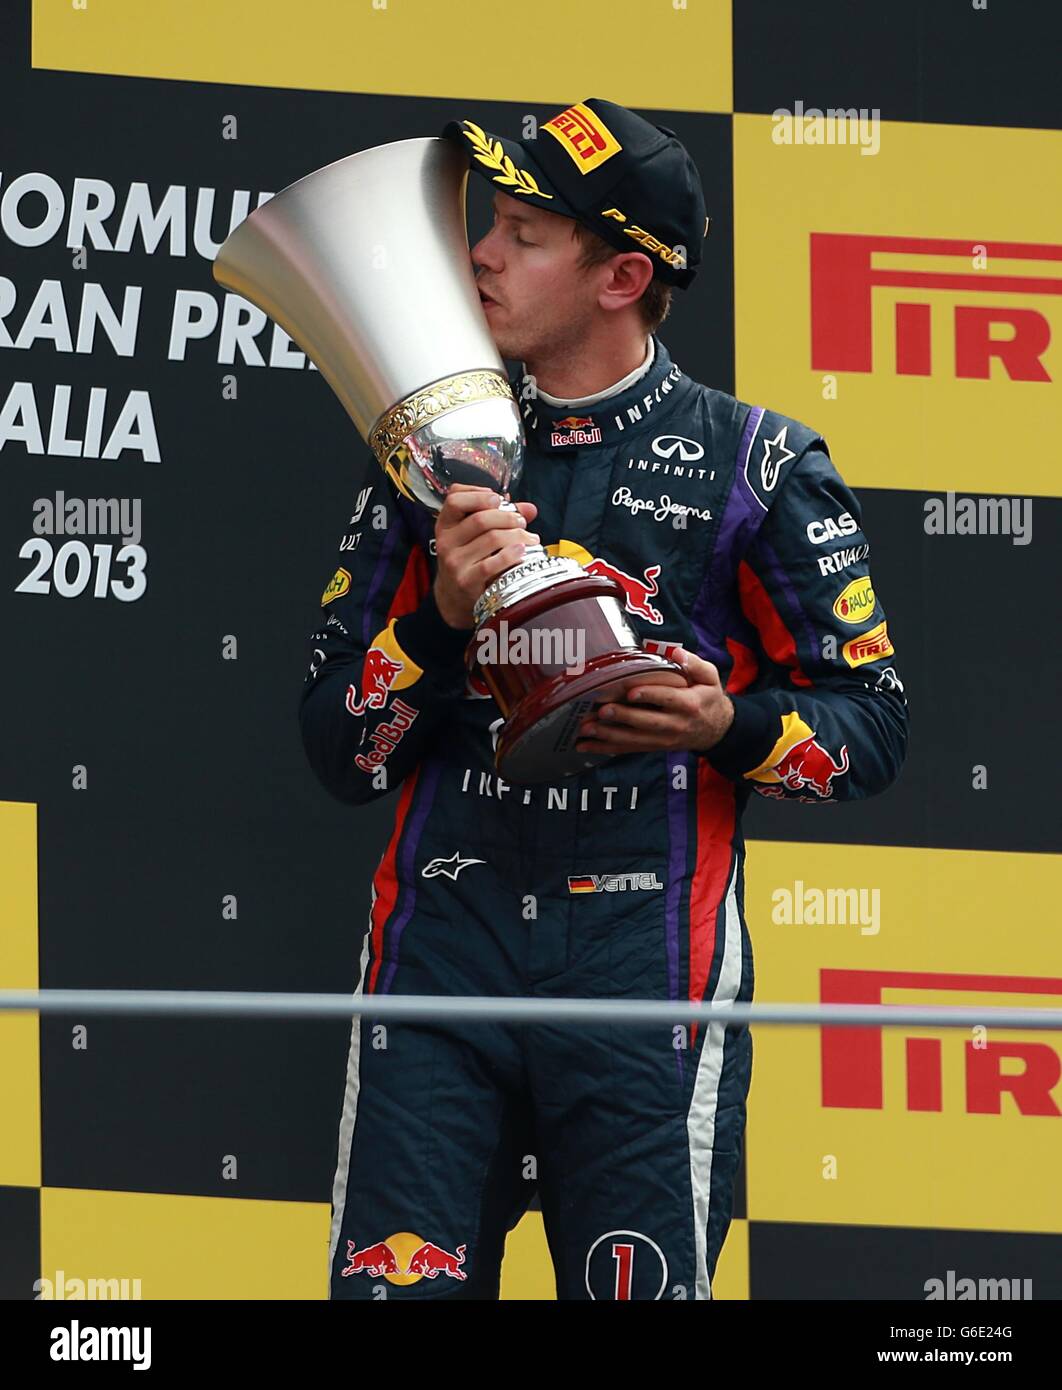 2013 Indian GP trophy - one of the best F1 trophies. : r/formula1